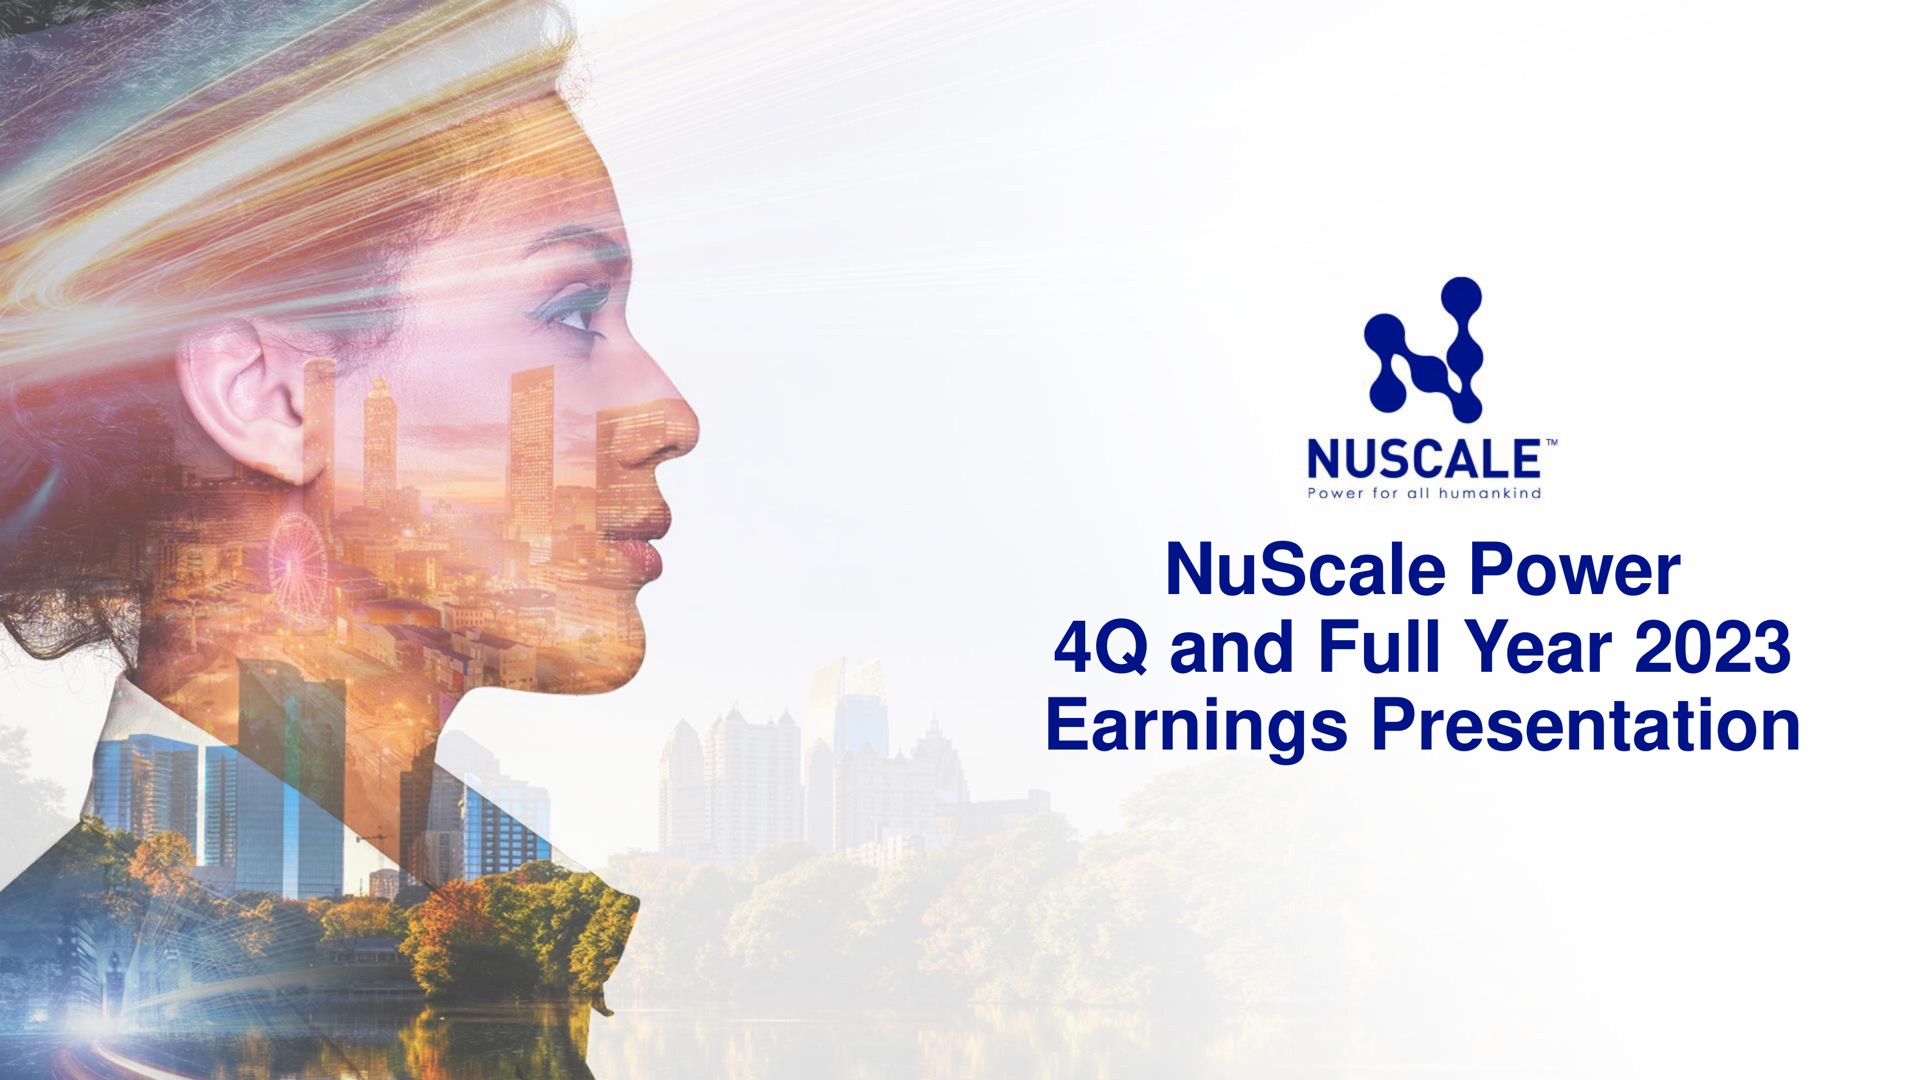 power and full year earnings presentation | Nuscale